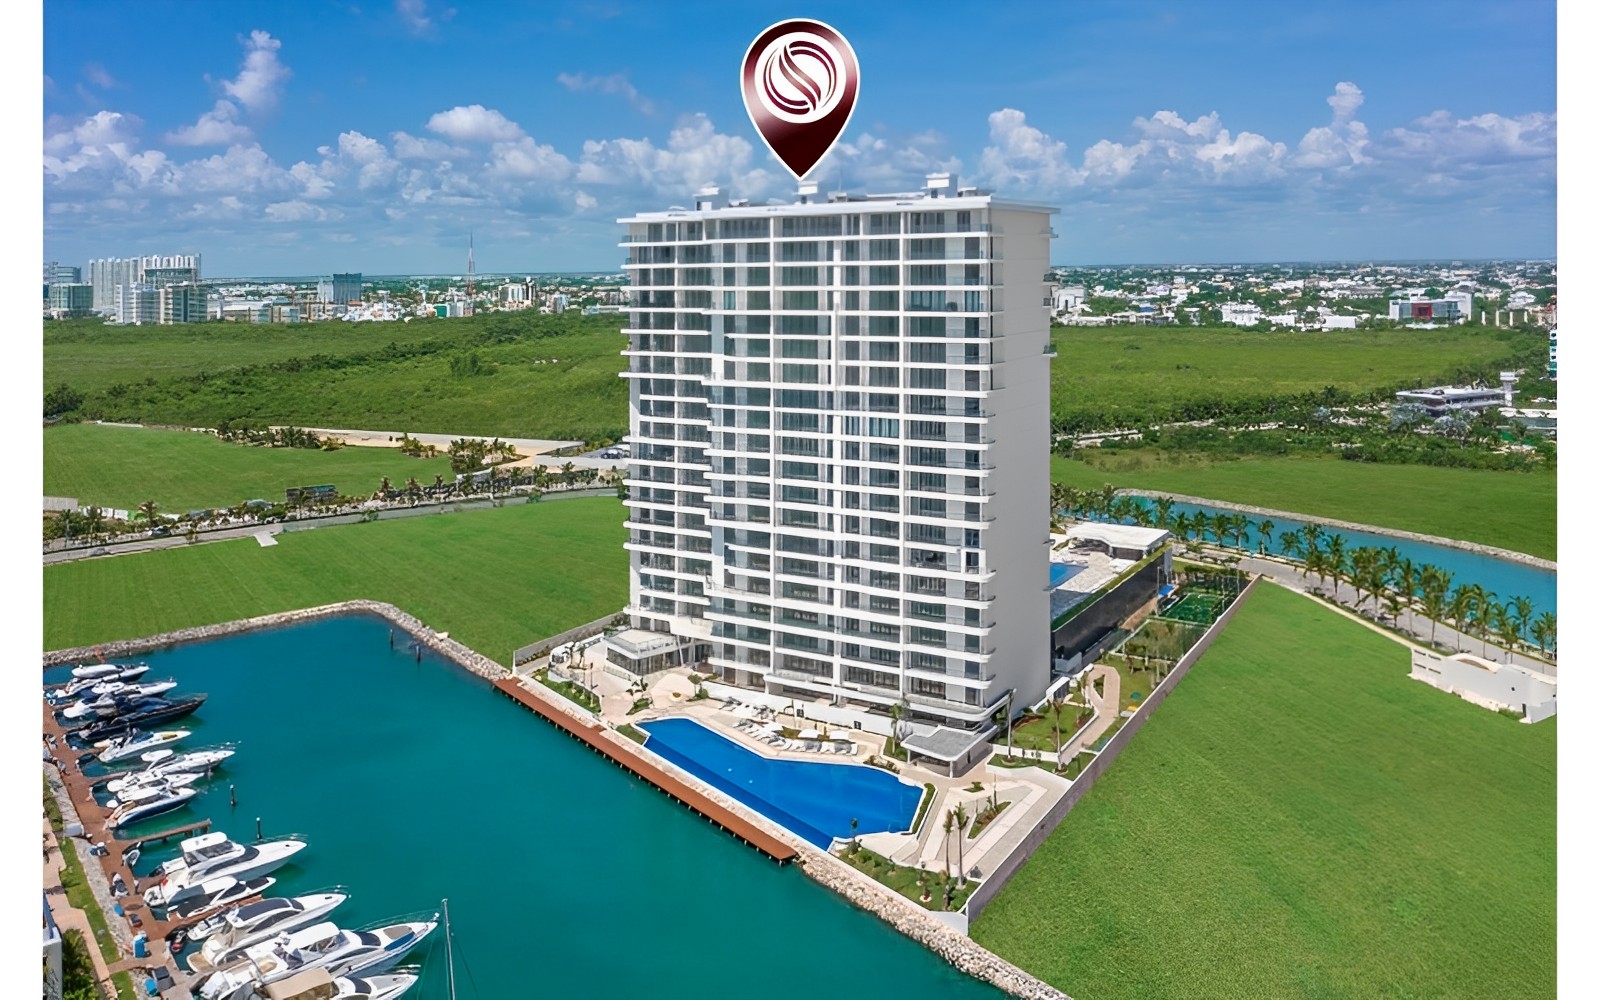 Condo overlooking the sea in modern and sustainable biulding, golf course and nature reserve. Fully equipped and with amenities